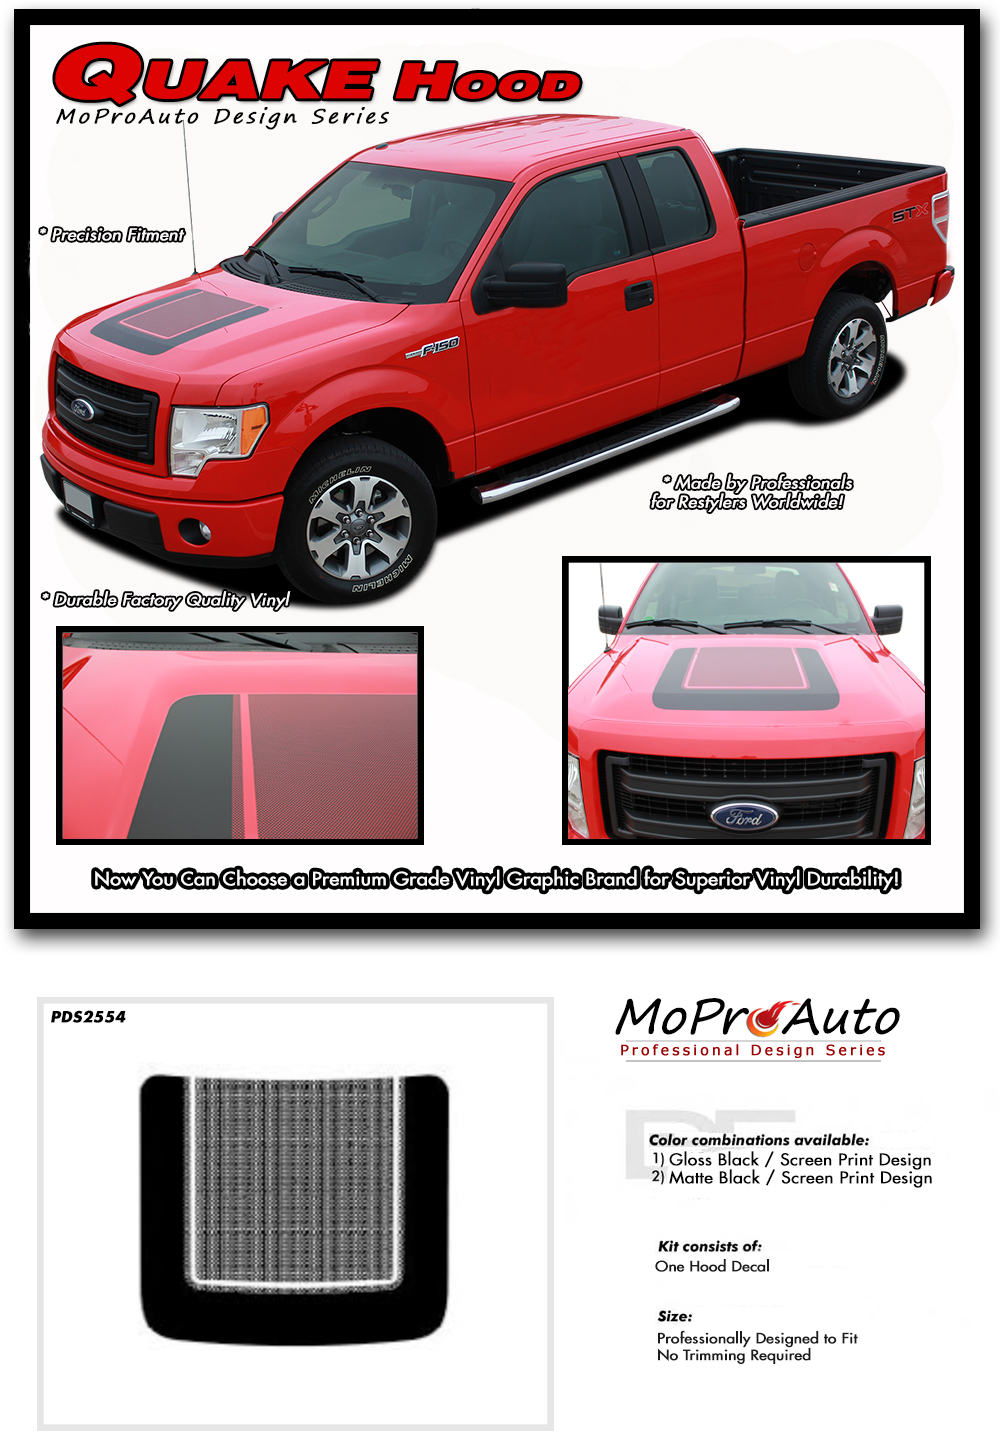 Tremor FX Appearance Package Hood Ford F-Series F-150 Vinyl Graphics Stripes and Decals Kit by MoProAuto Pro Design Series